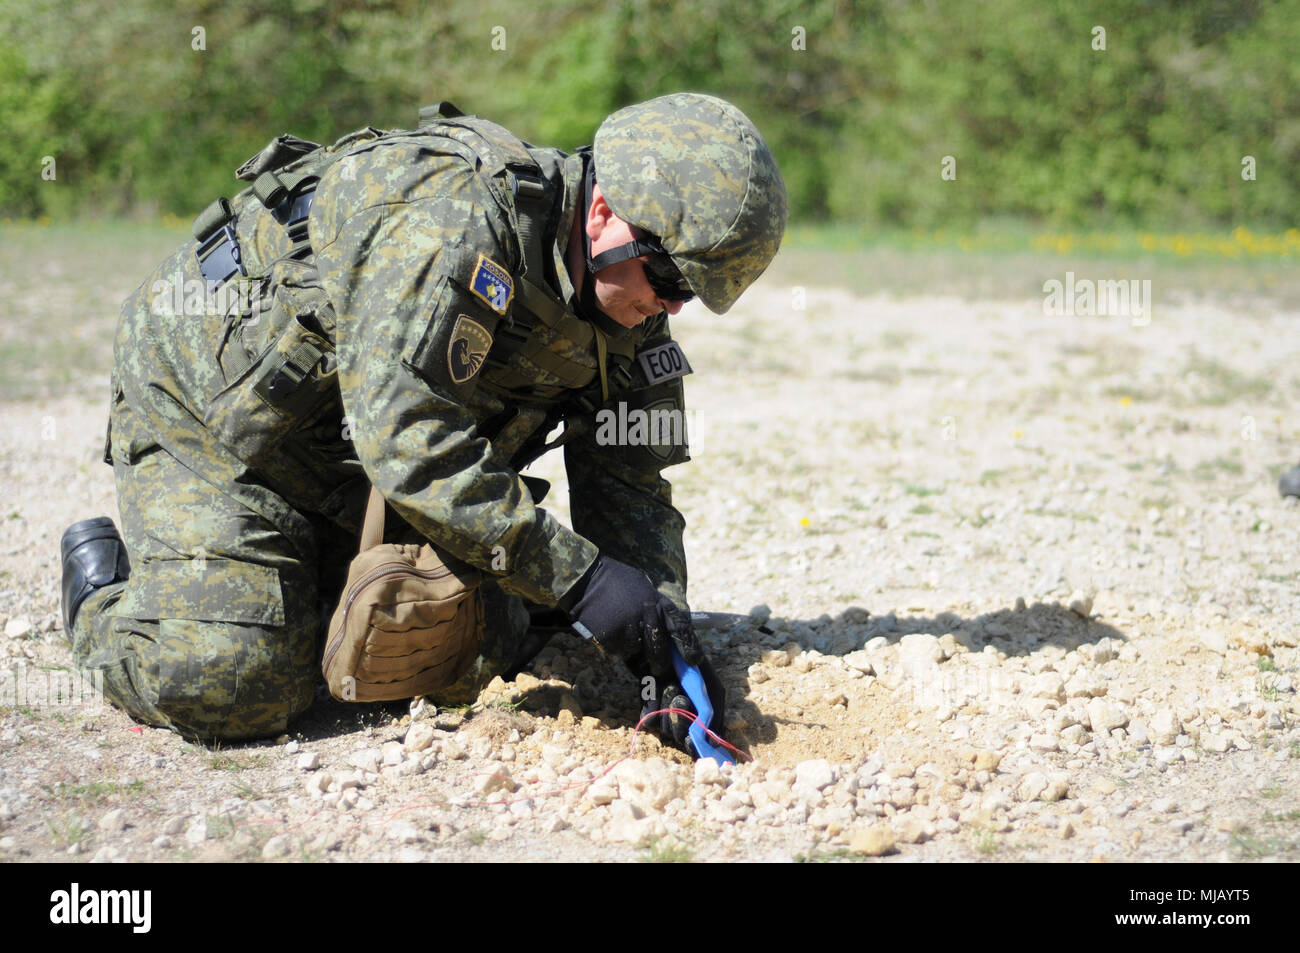 Kosovo Army Staff Sgt. Islam Kadriu, team leader, Explosive Ordnance Disposal Company, Kosovo Civil Protection Regiment, uncovers a mock improvised explosive device on the IED lanes in the Hohenfels Training Area, Hohenfels, Germany, during Combined Resolve X on April 27, 2018. Combined Resolve X includes approximately 3,700 participants from 13 nations at the 7th Army Training Command’s Grafenwoehr and Hohenfels Training Area, April 9 to May 12, 2018. Combined Resolve is a U.S. Army Europe-directed multinational exercise designed to give the Army’s regionally allocated combat brigades to Euro Stock Photo